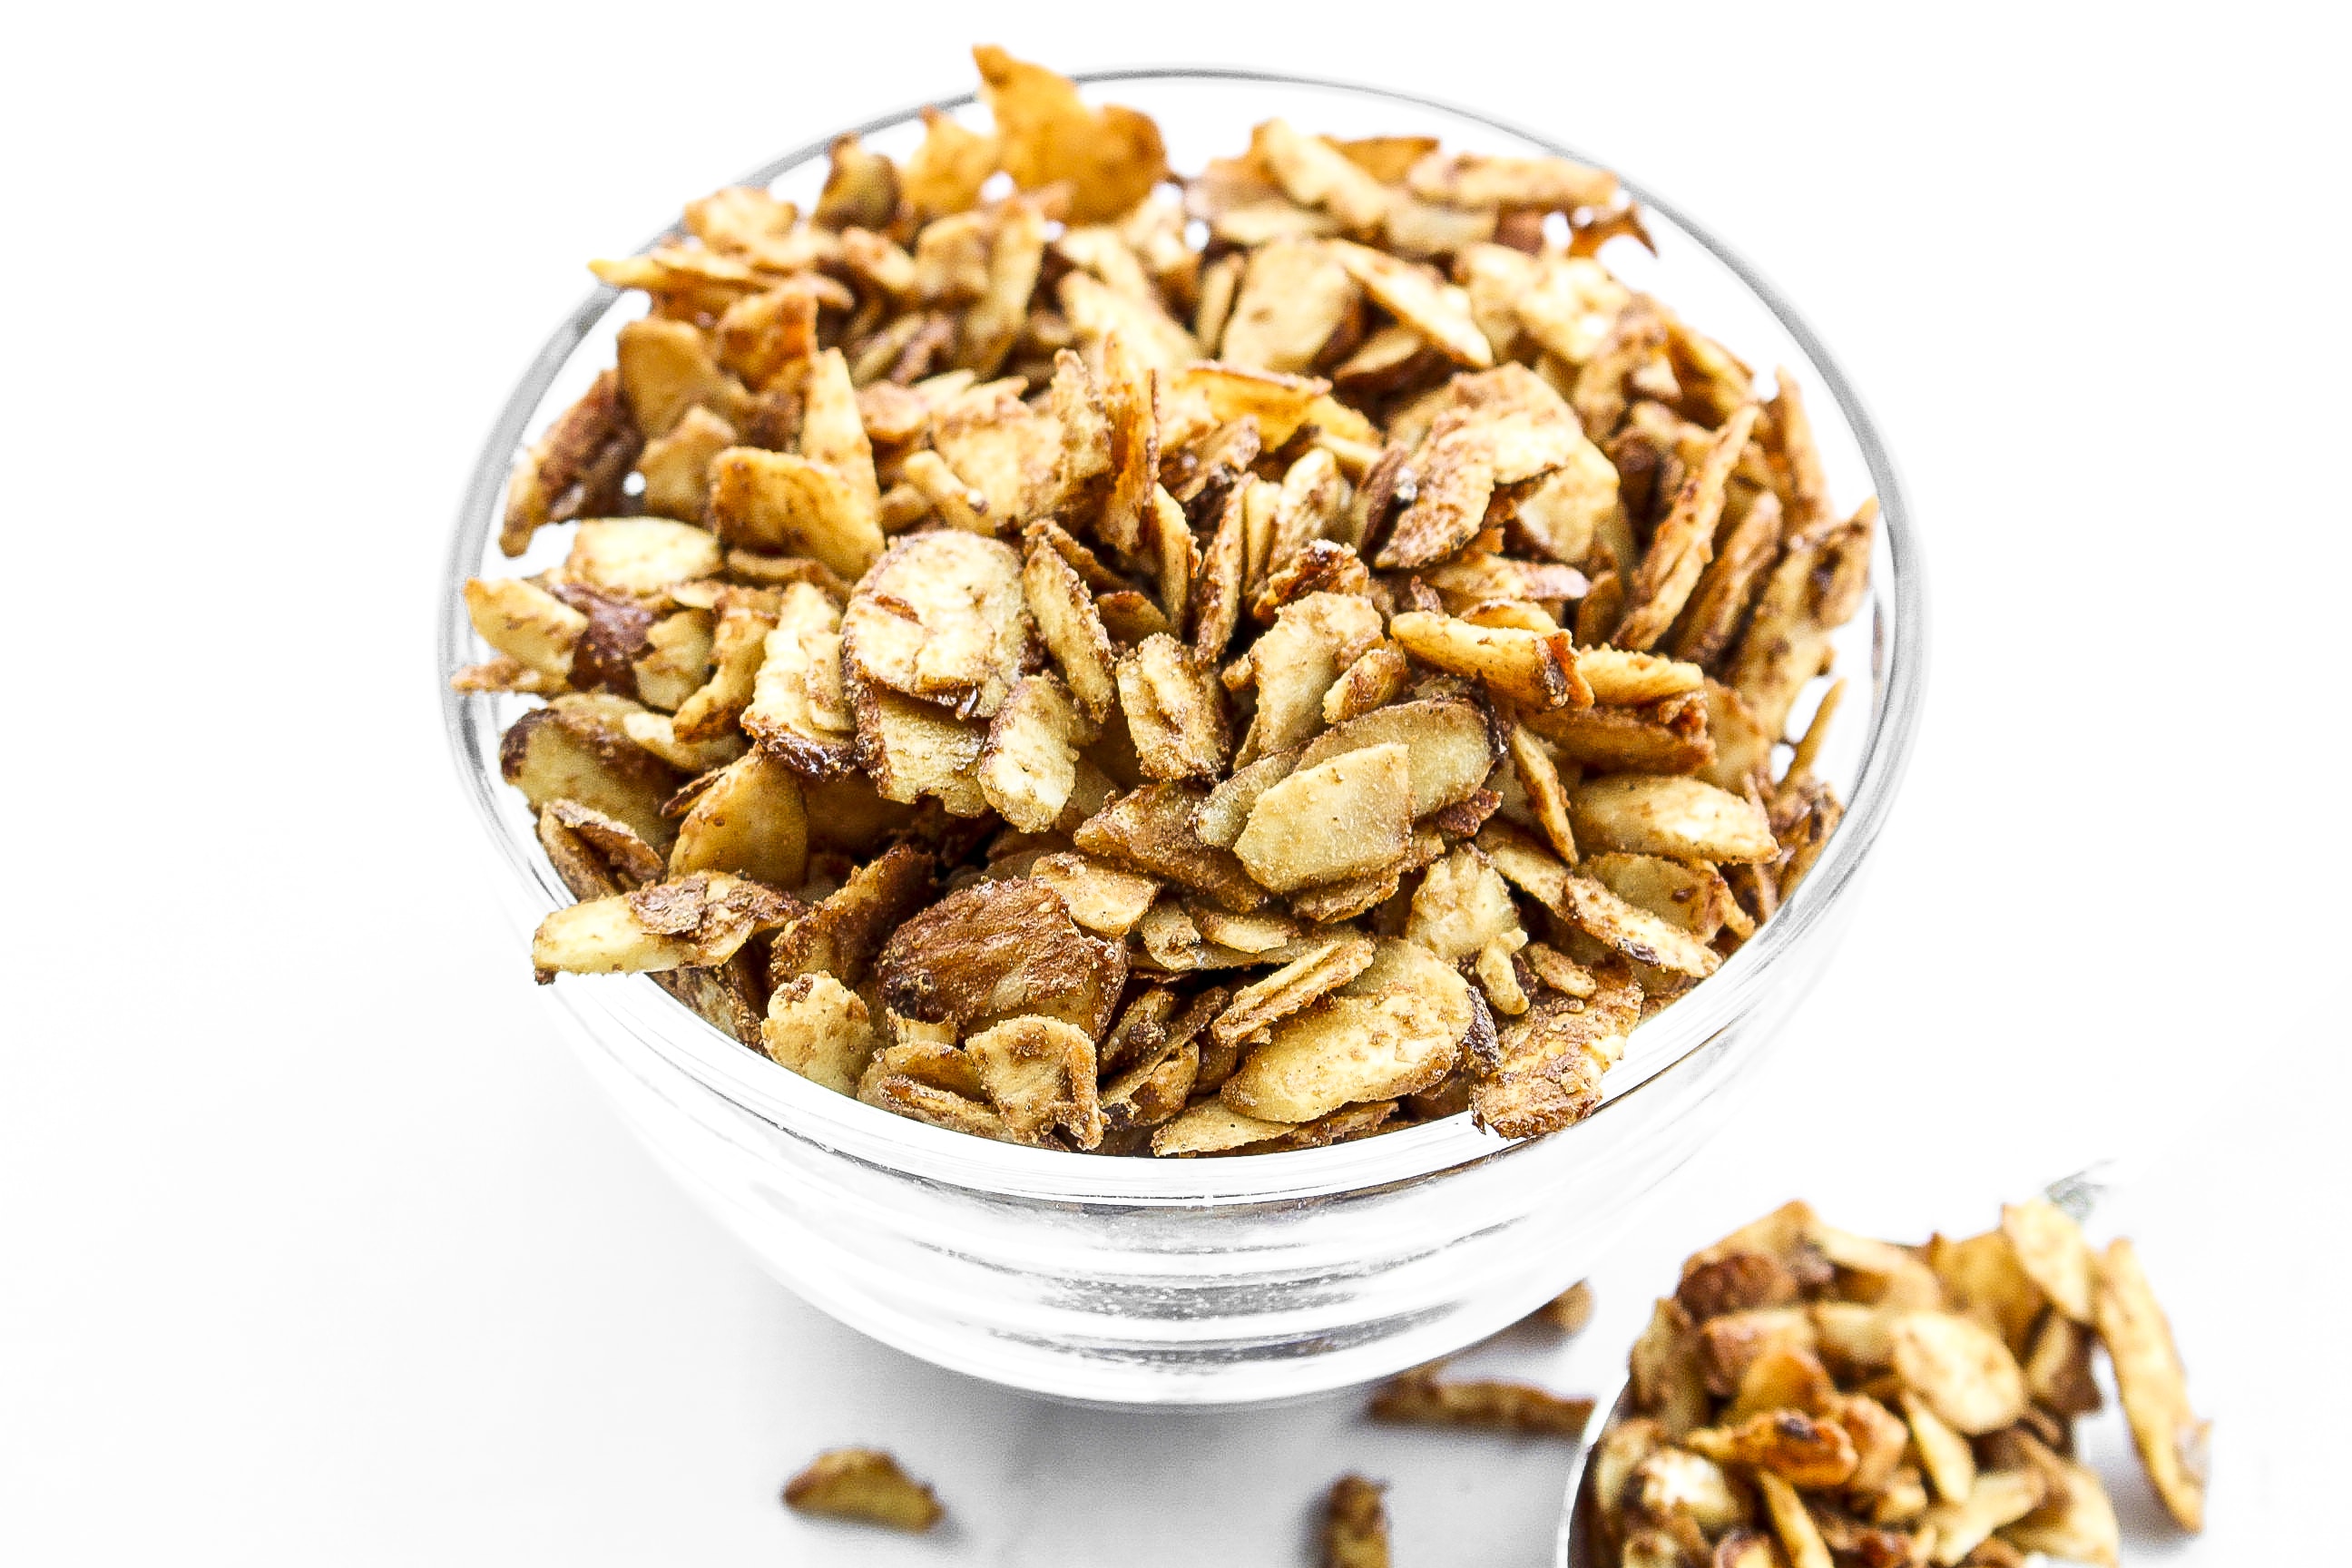 Cardamom Spiced Almonds add a show-stopping finish to many a dish, and are also great by the handful! Sweetened with coconut sugar, they're also a healthy snack. Top salads, coconut rice, and more.